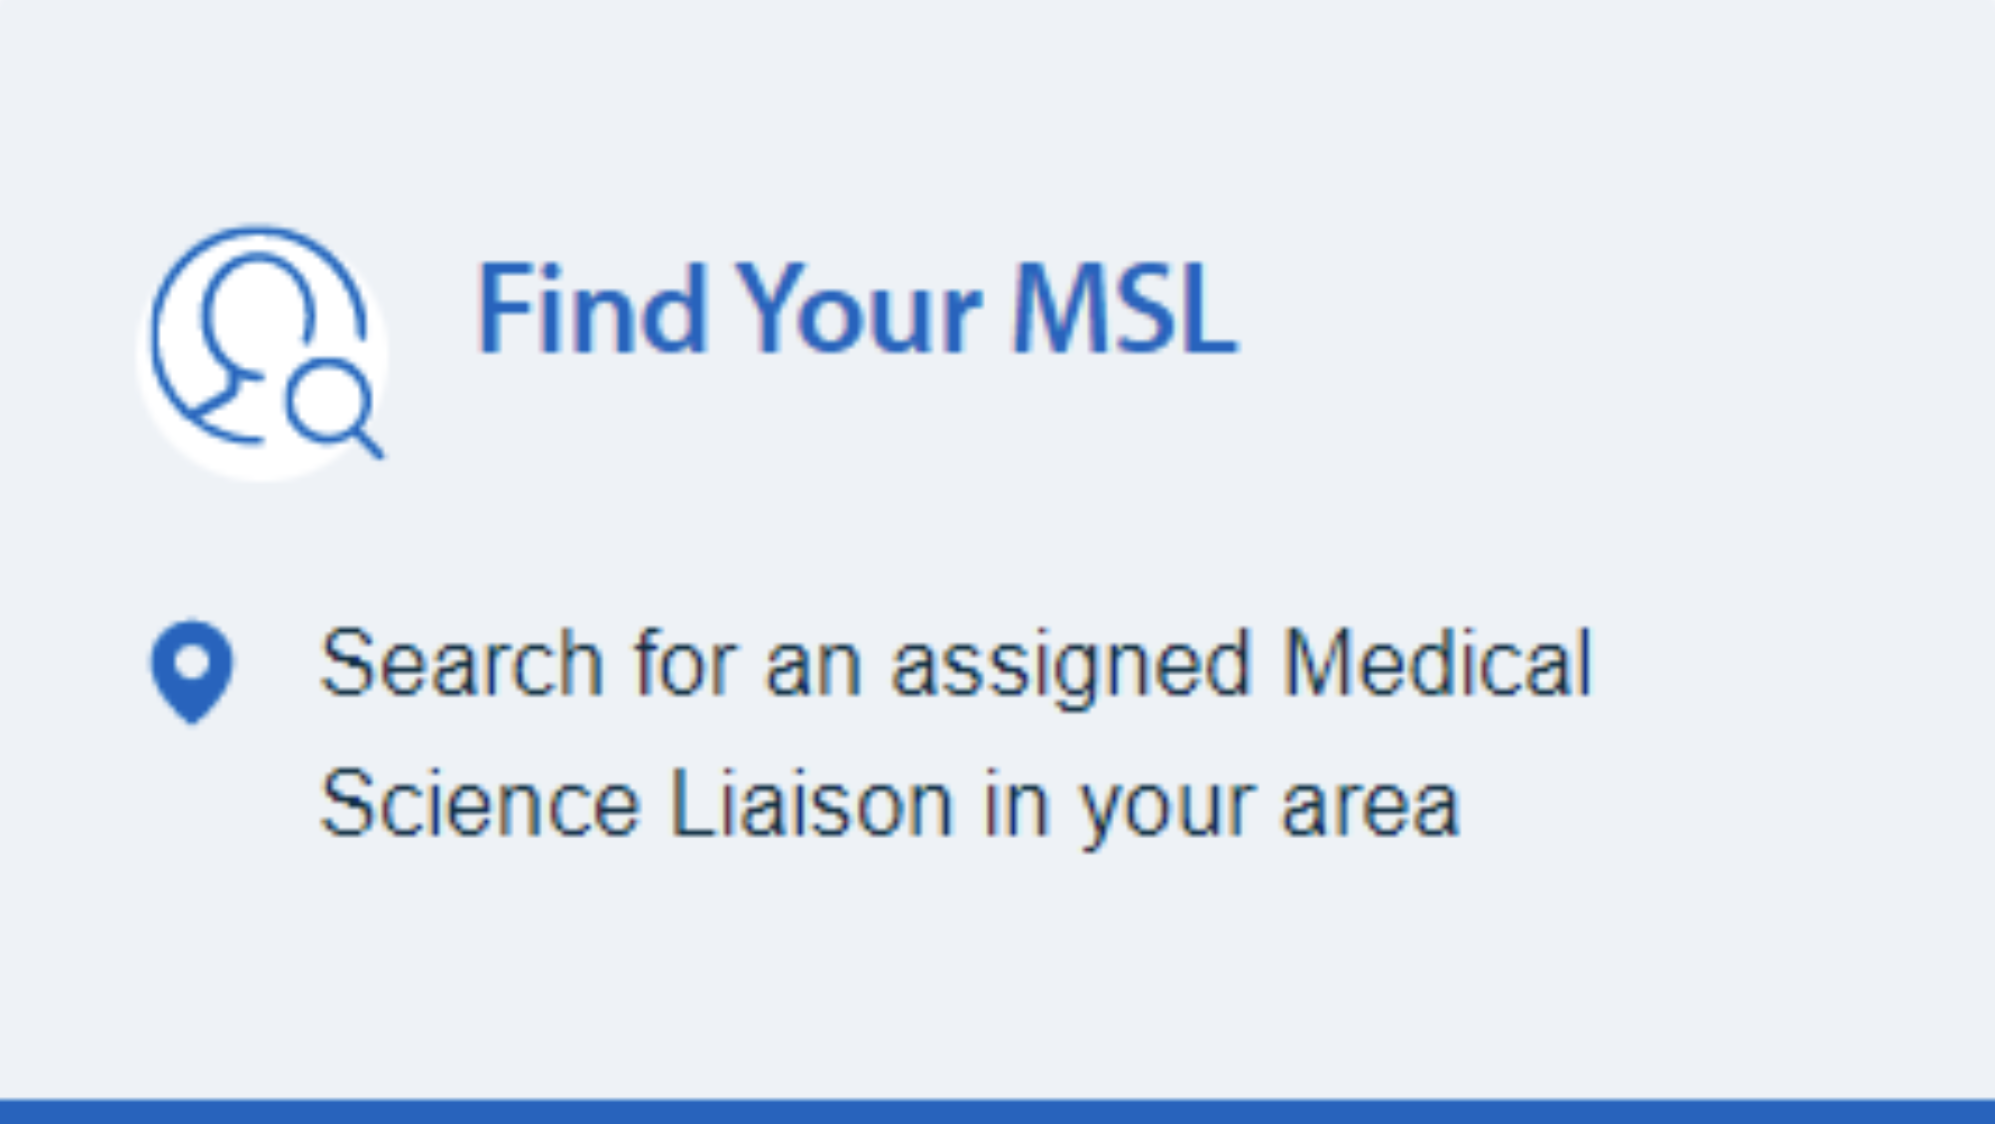 Connect with a Medical Science Liaison 